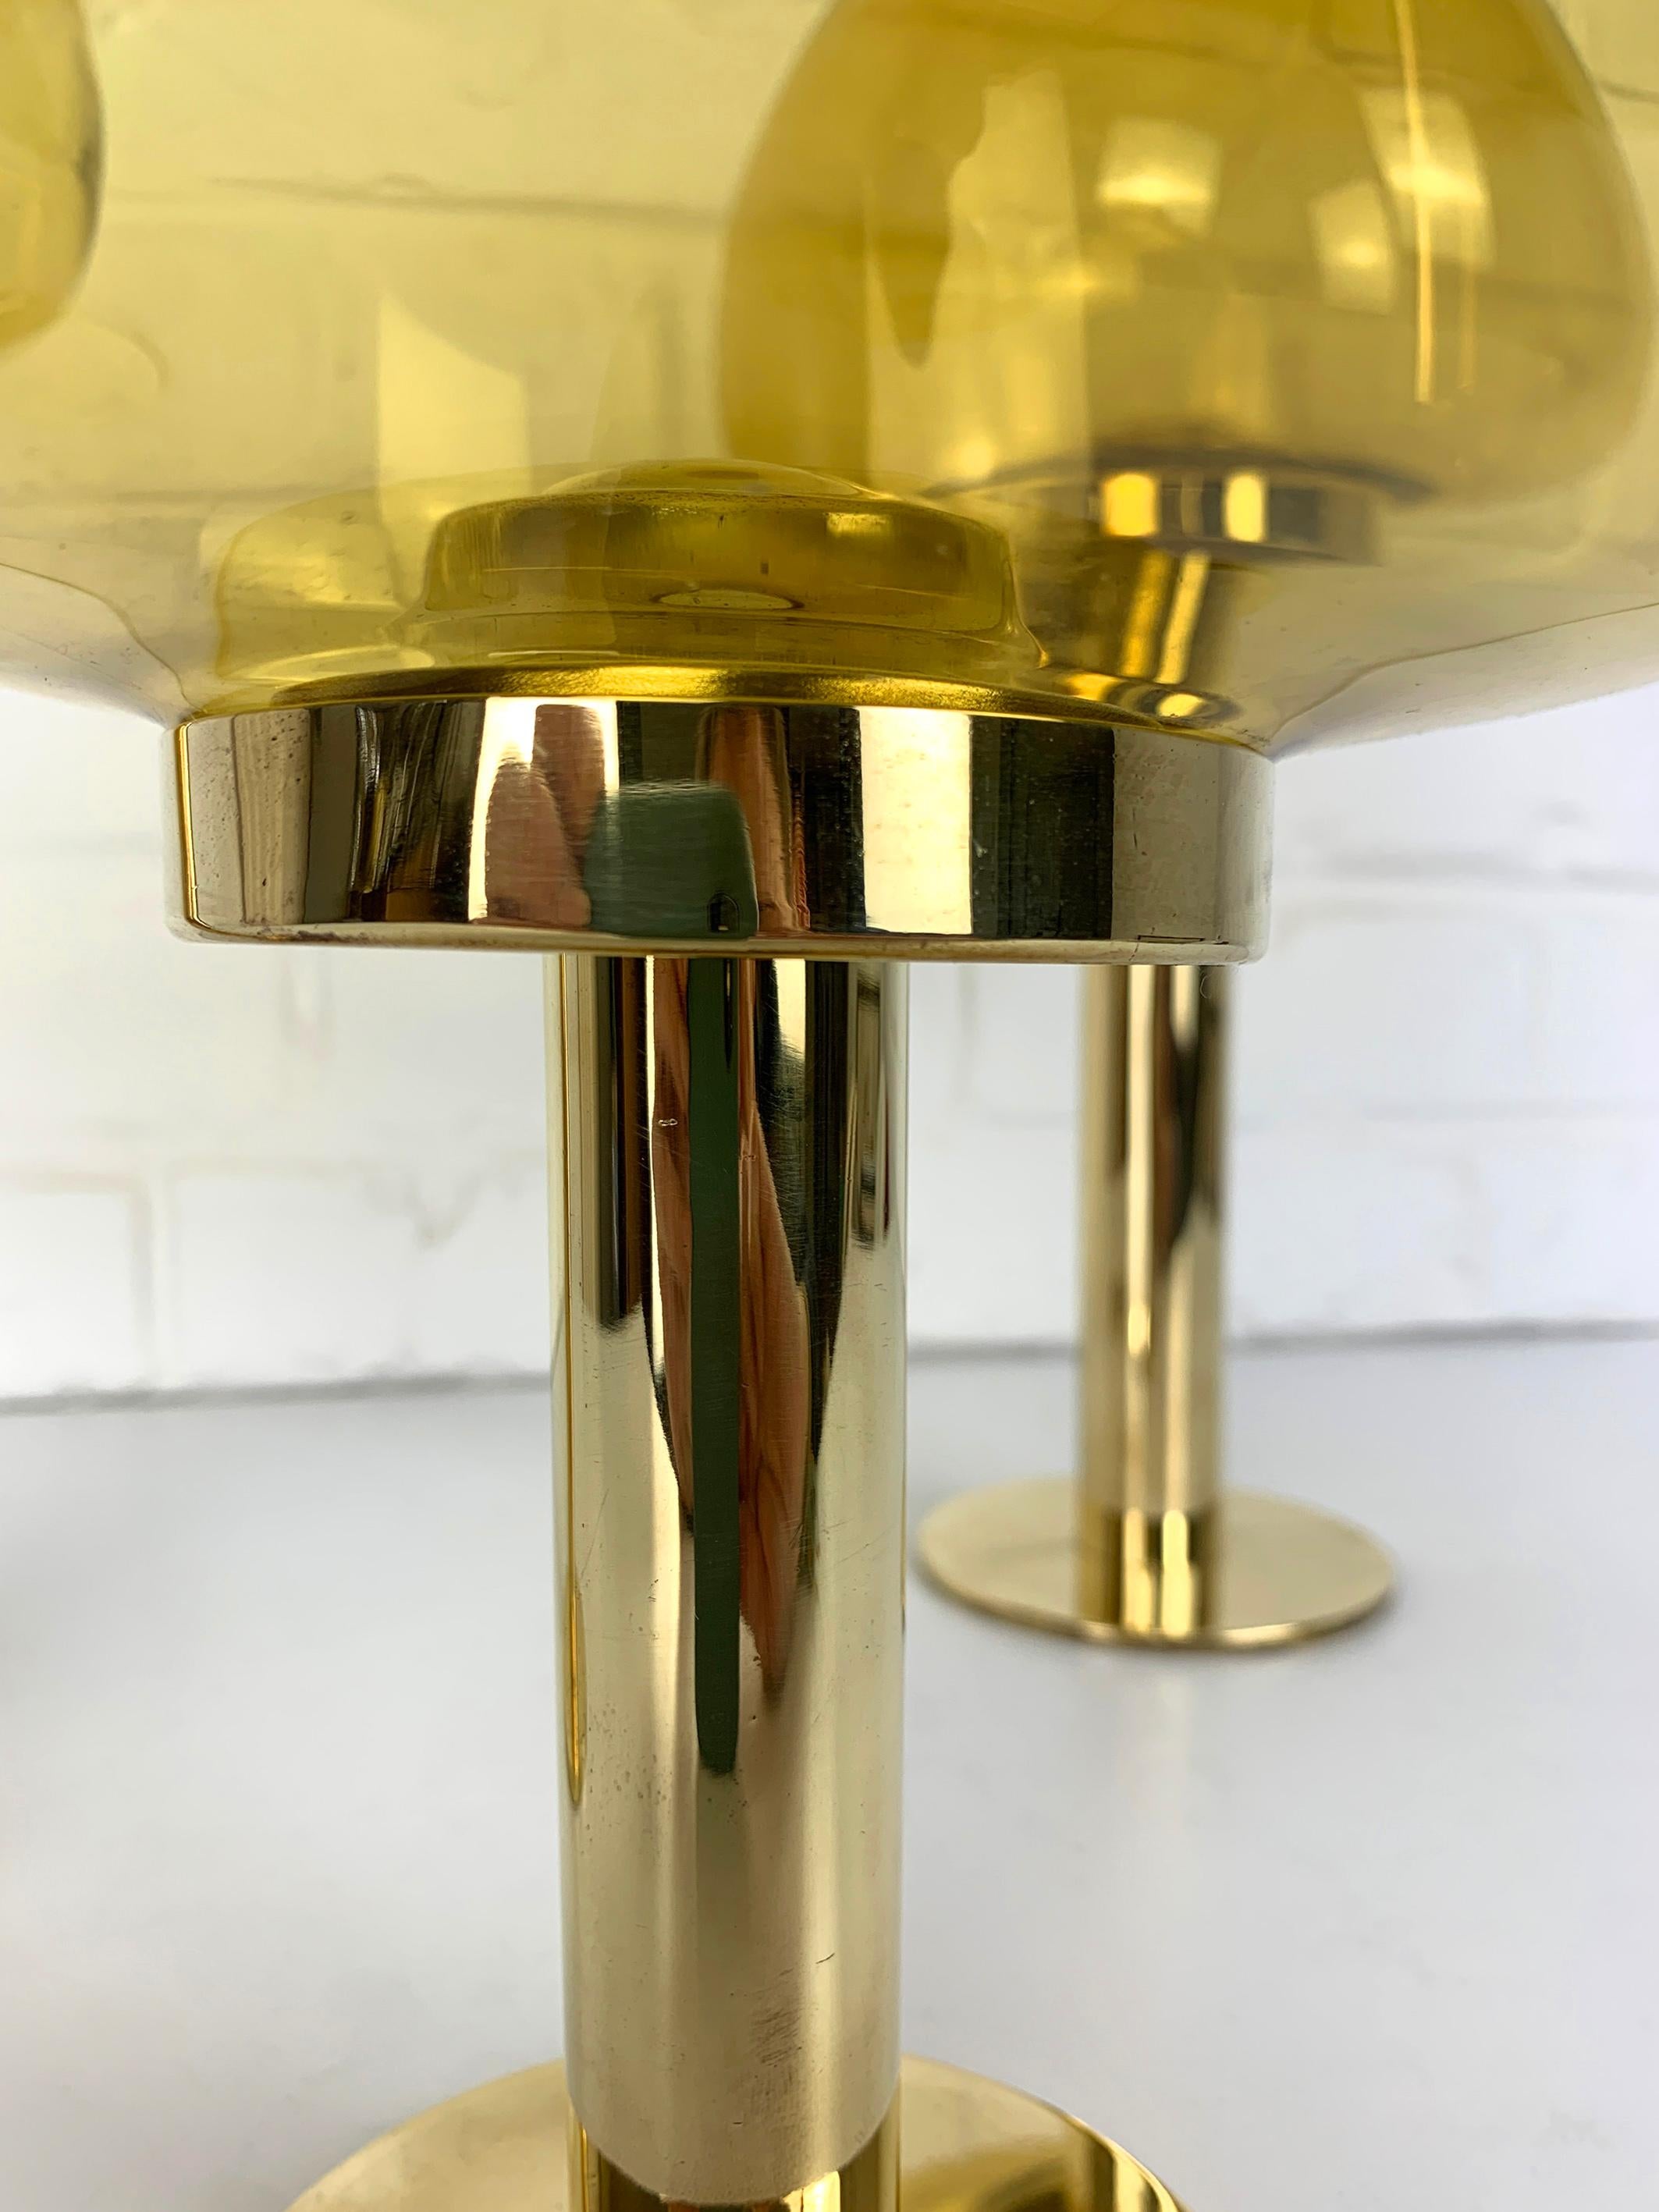 20th Century Set of 3 candle-lights in Brass, Hans-Agne Jakobsson, AB Markaryd, Sweden, 1960s For Sale